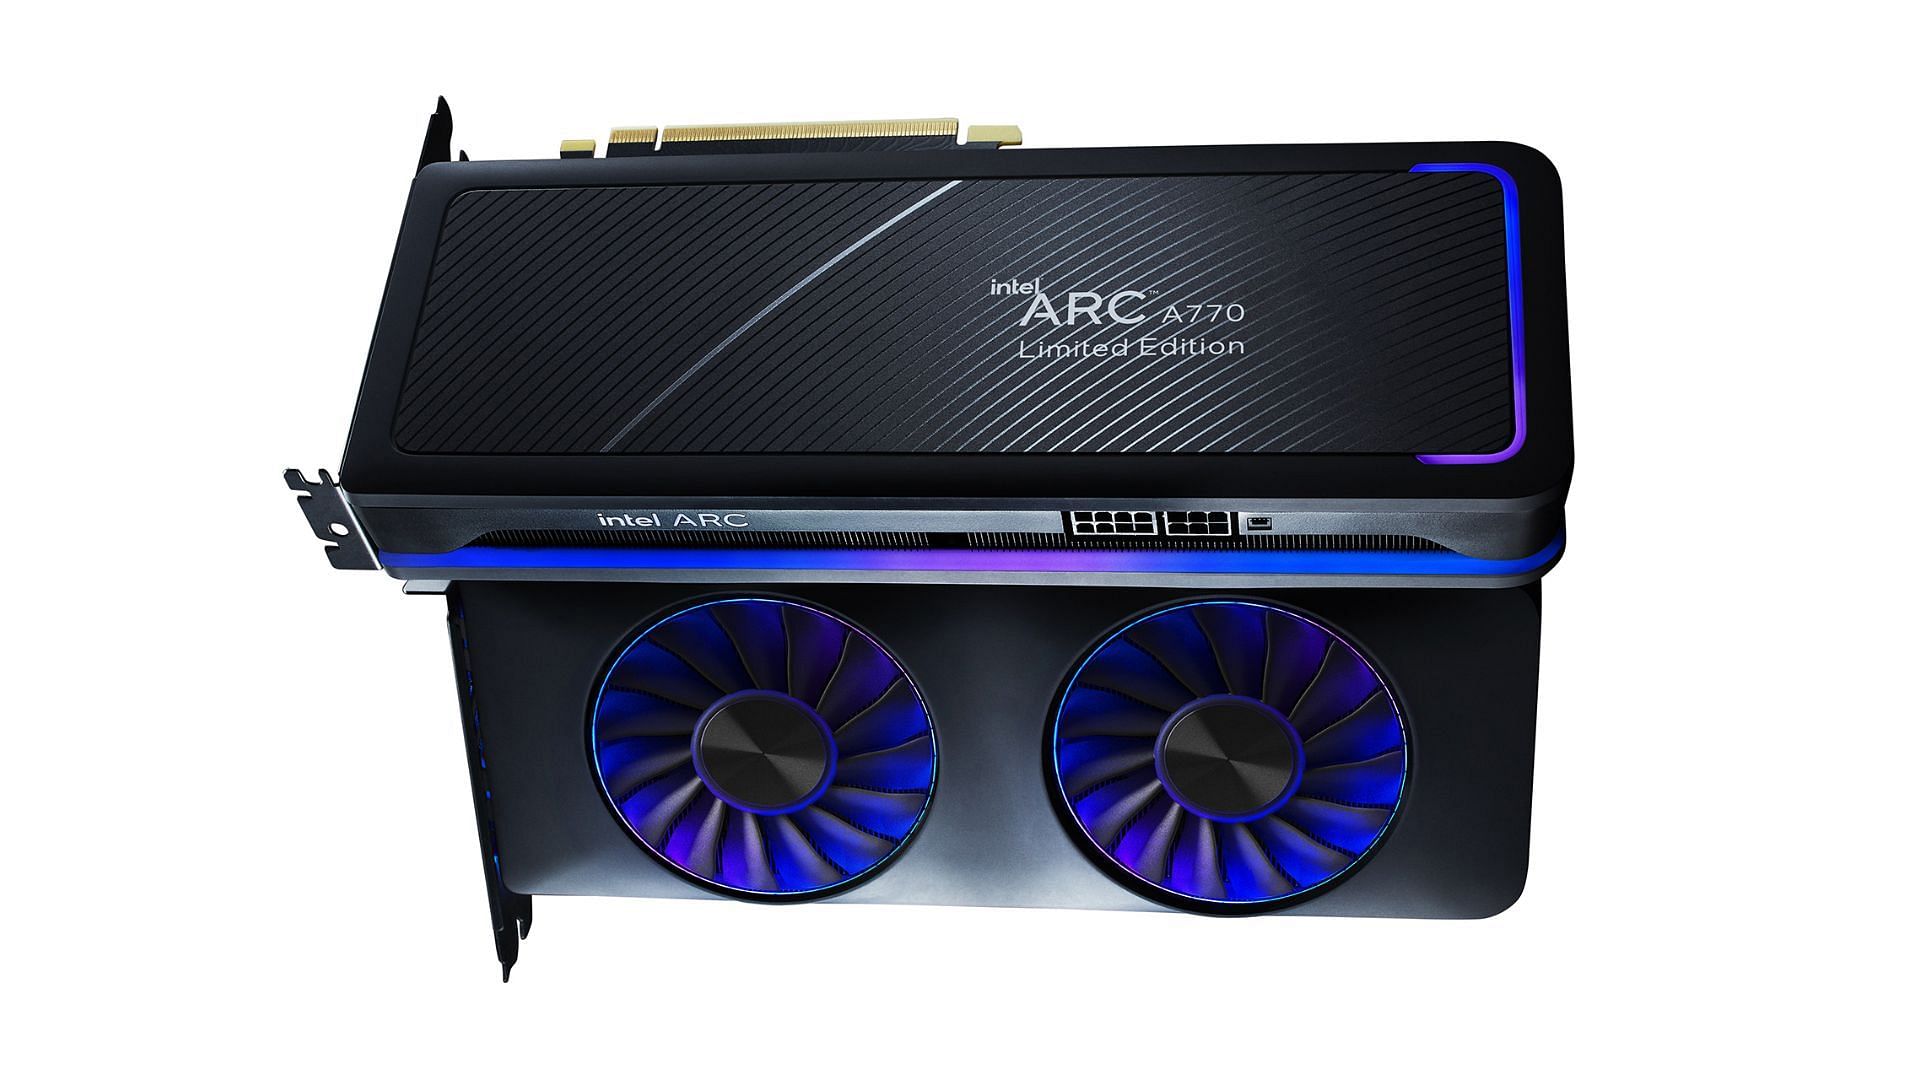 The ARC A770 Limited Edition reference card (Image via Intel)